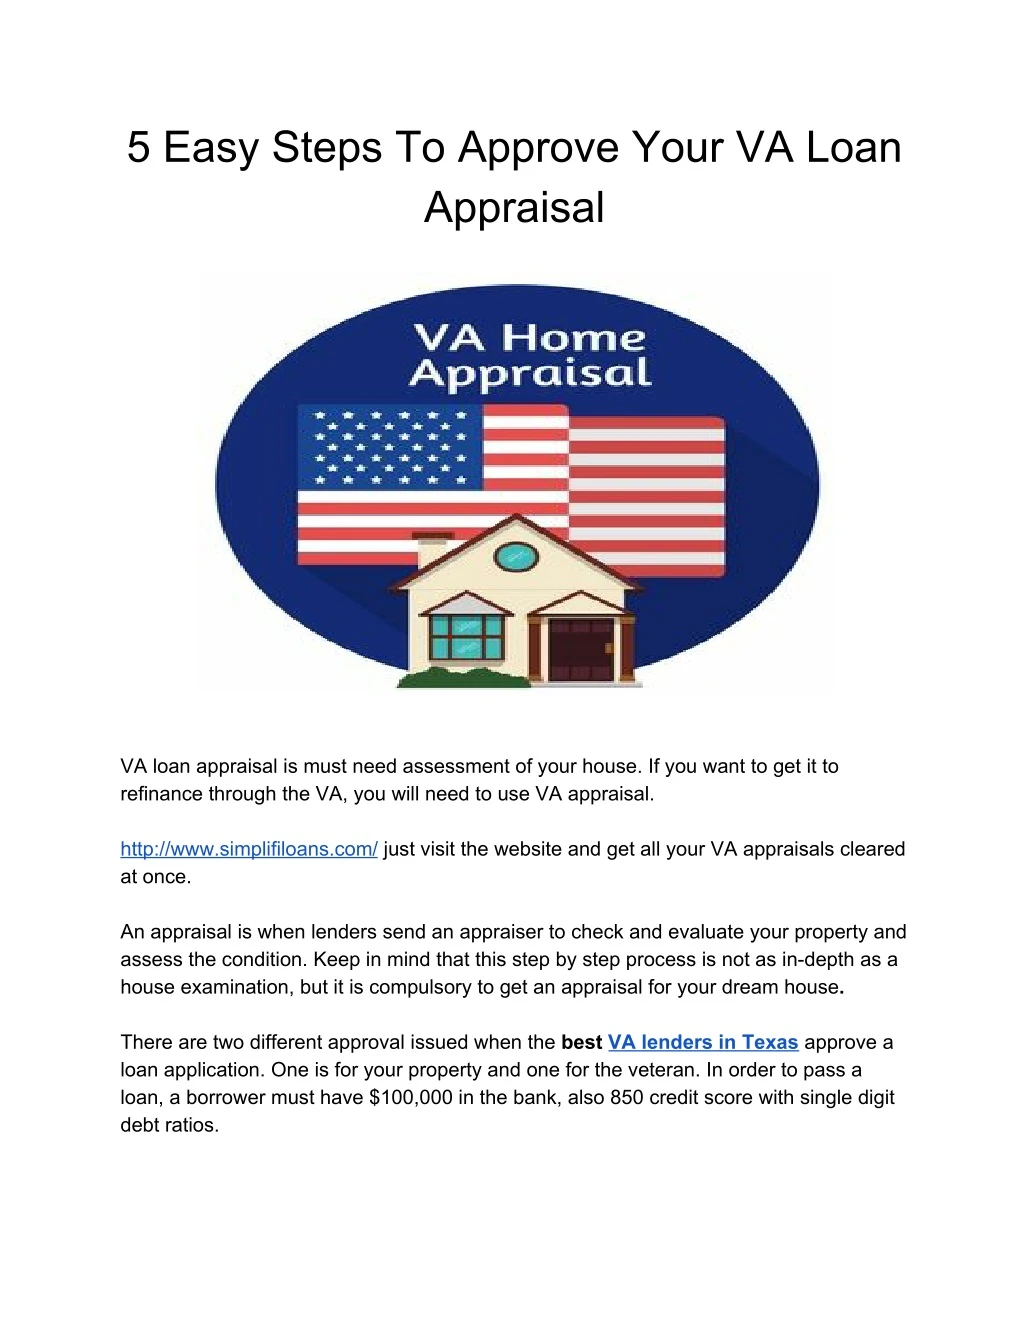 5 easy steps to approve your va loan appraisal